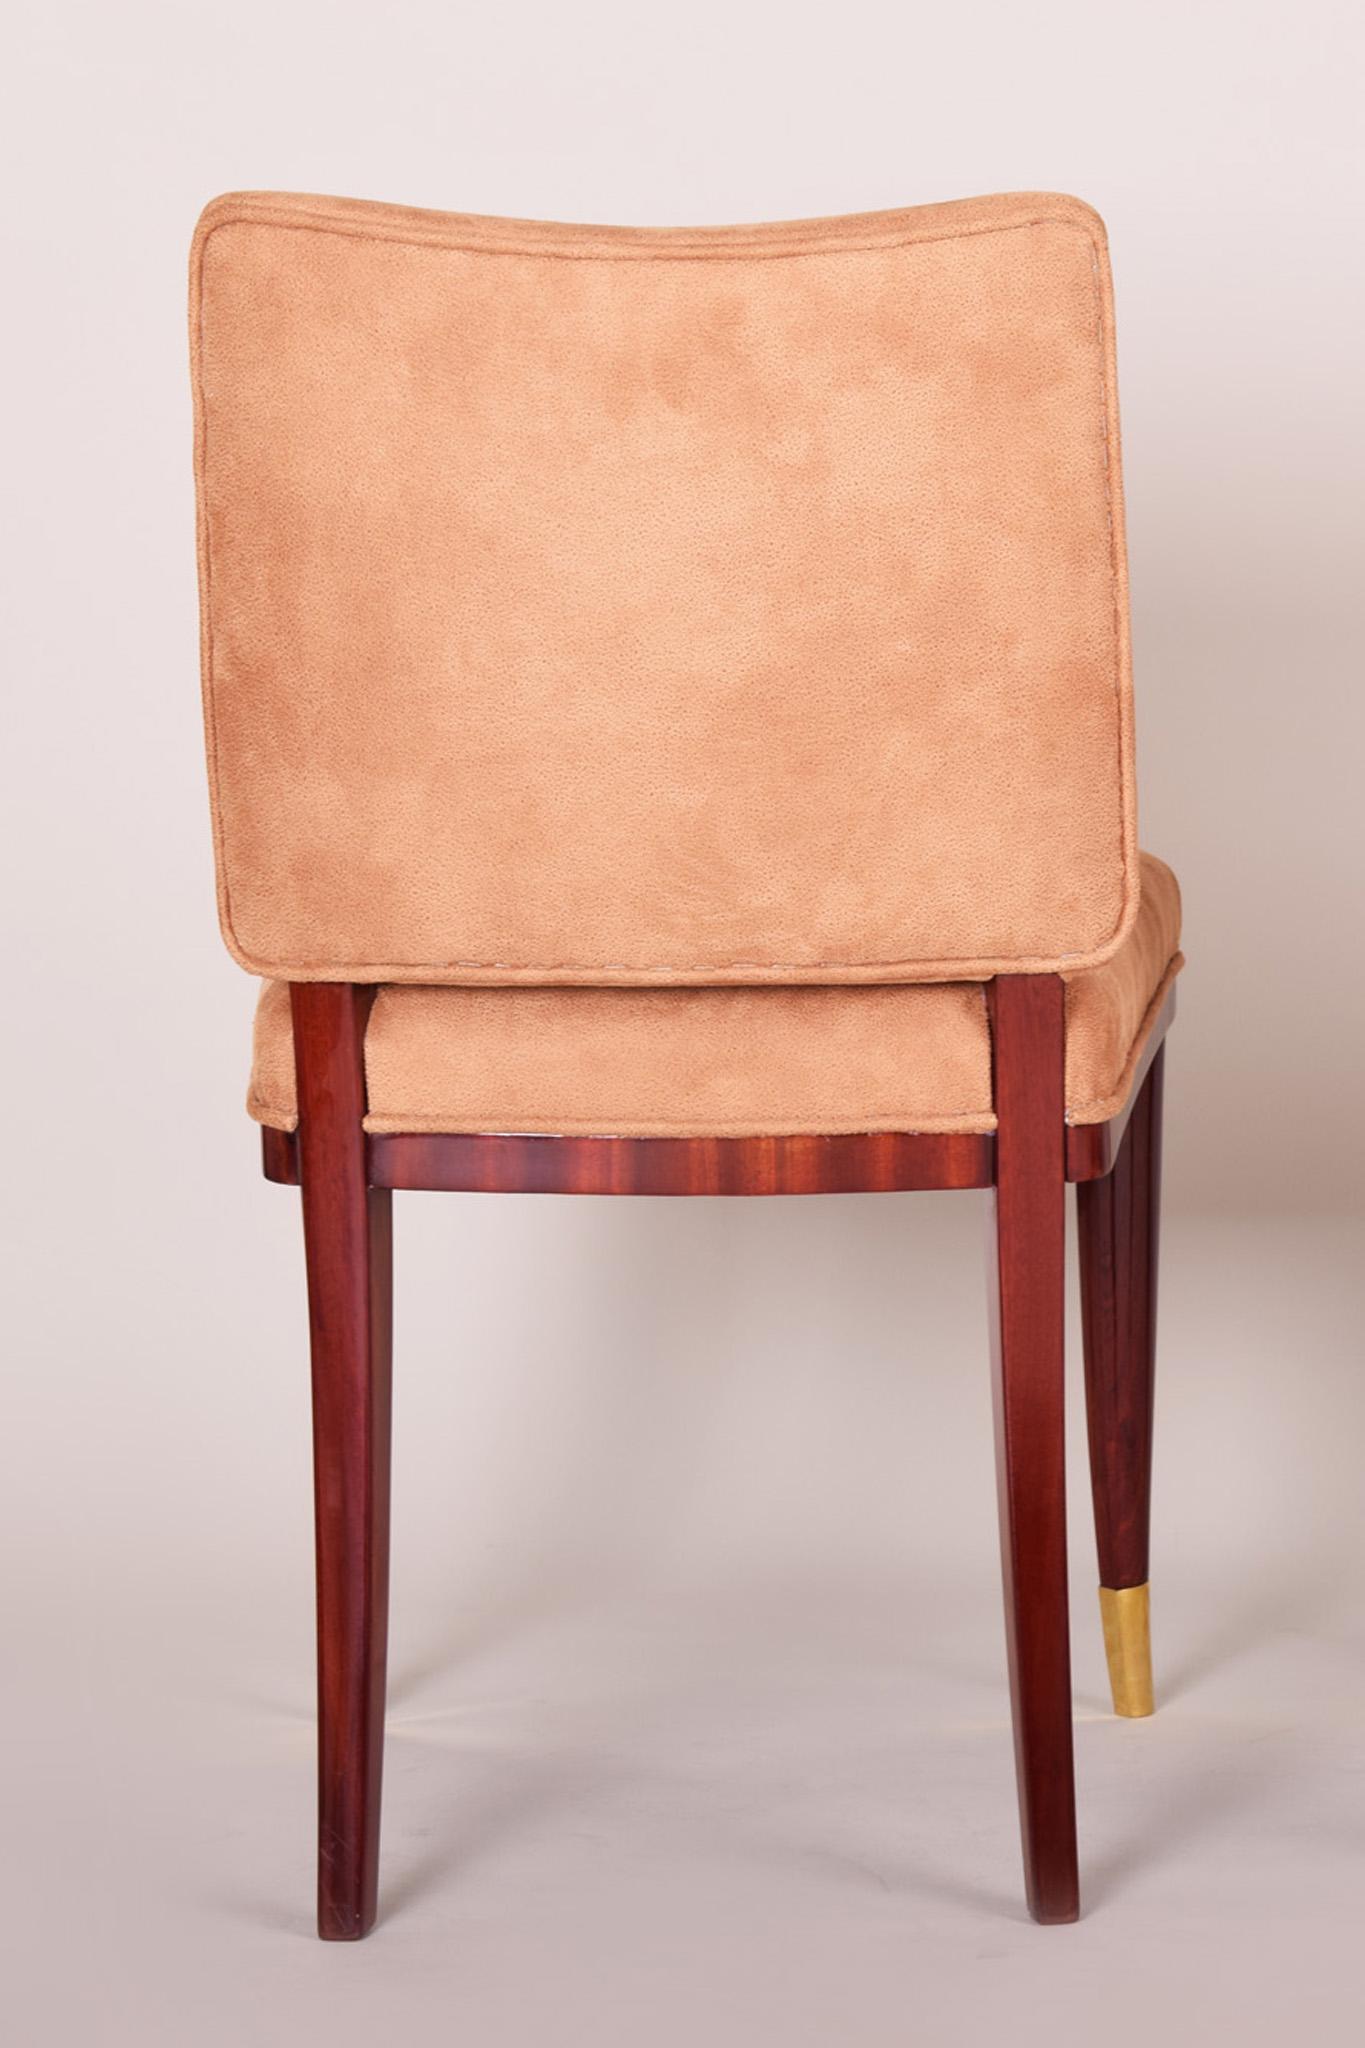 Early 20th Century Restored Beige French Art Deco Chair, Designed by Jules Leleu, 1920-1929 For Sale